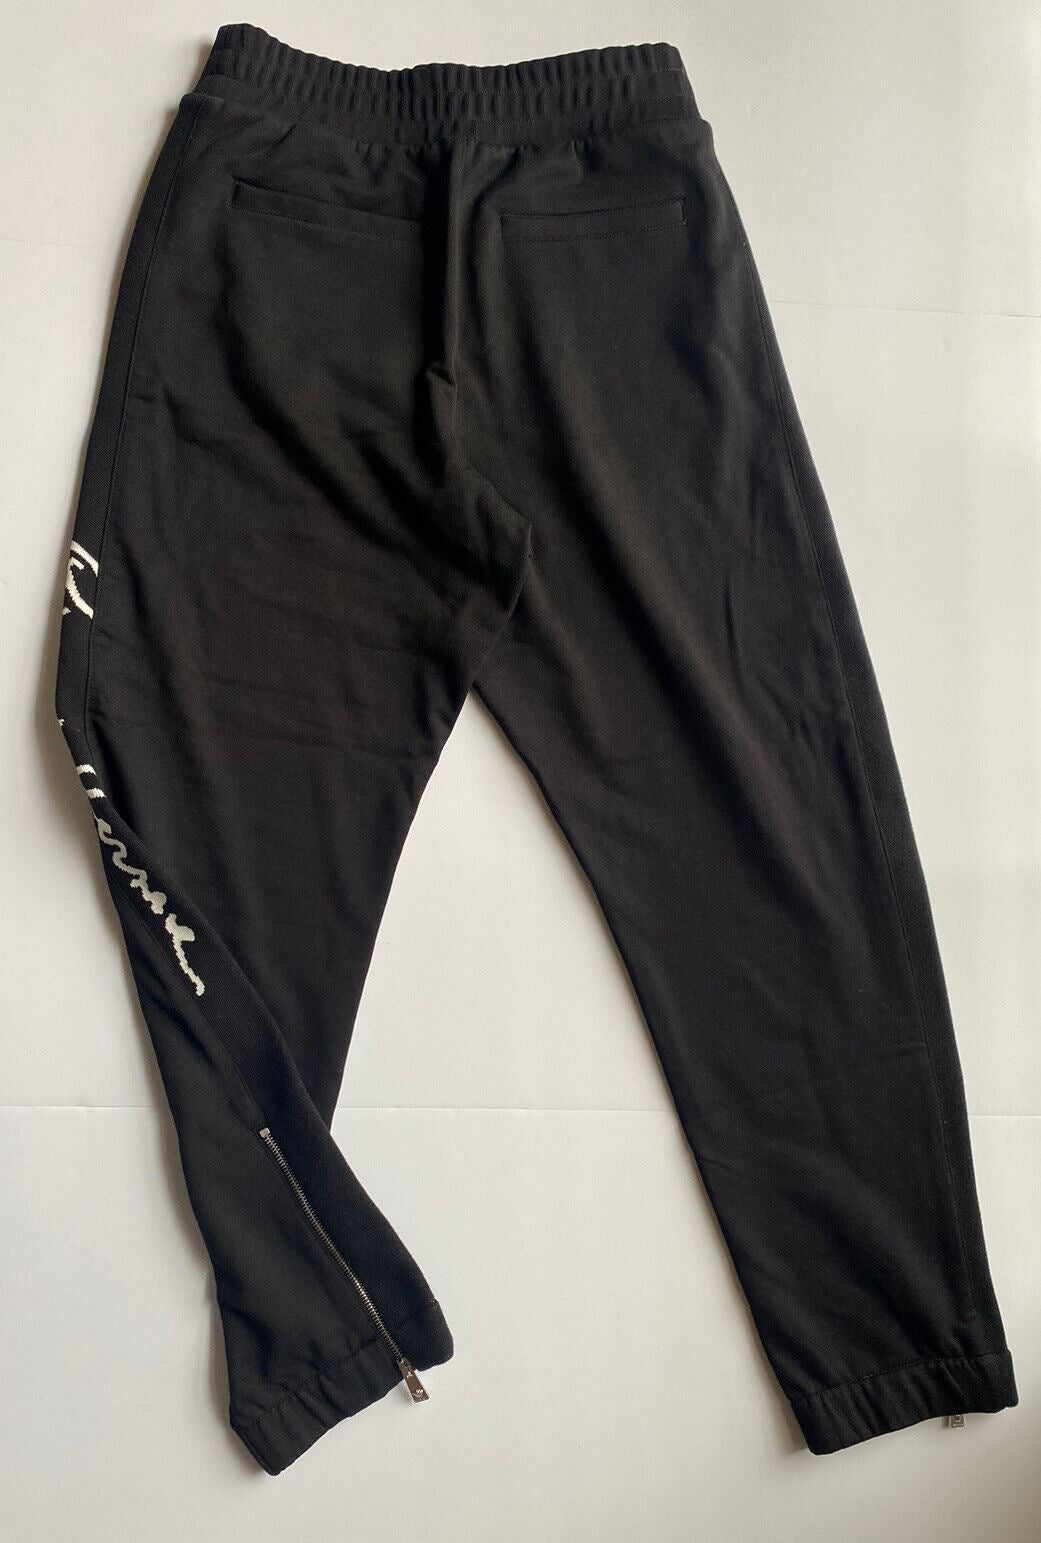 NWT $850 Versace Men's Black Mitchel Fit Pants Size Small Made in Italy A86887